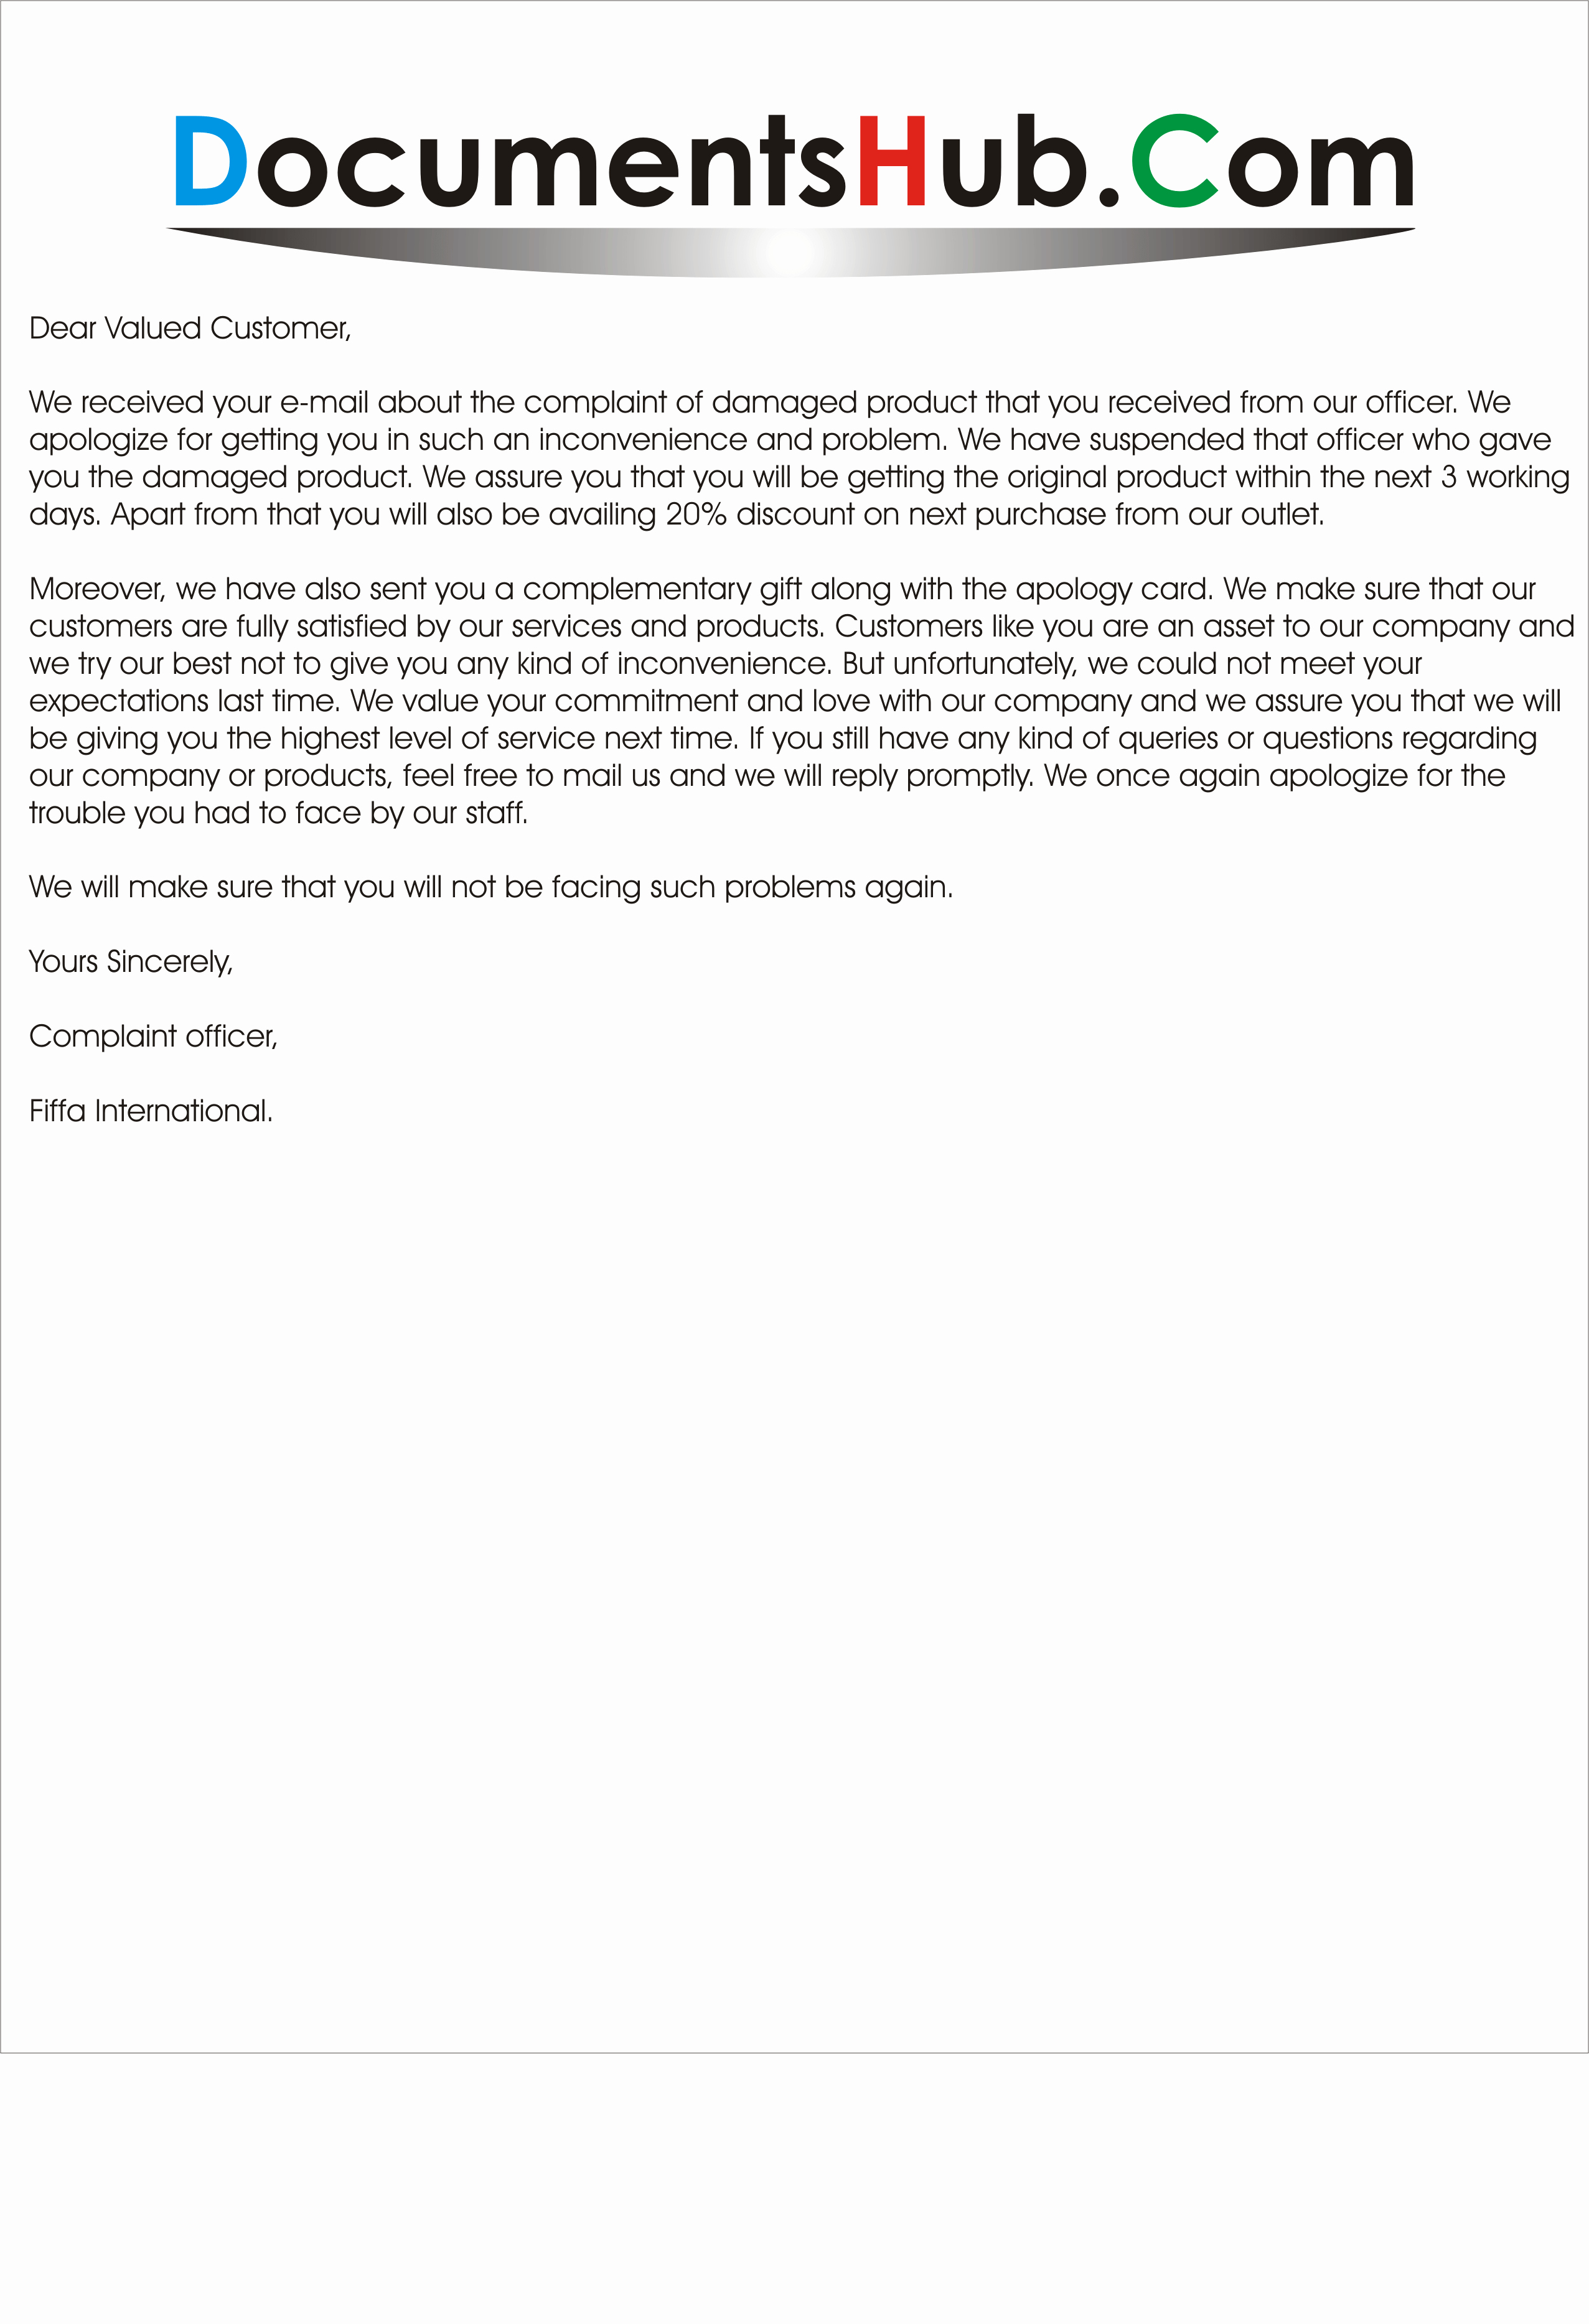 Customer Service Complaints Examples Elegant Apology Letter In Response to Customer Plaint